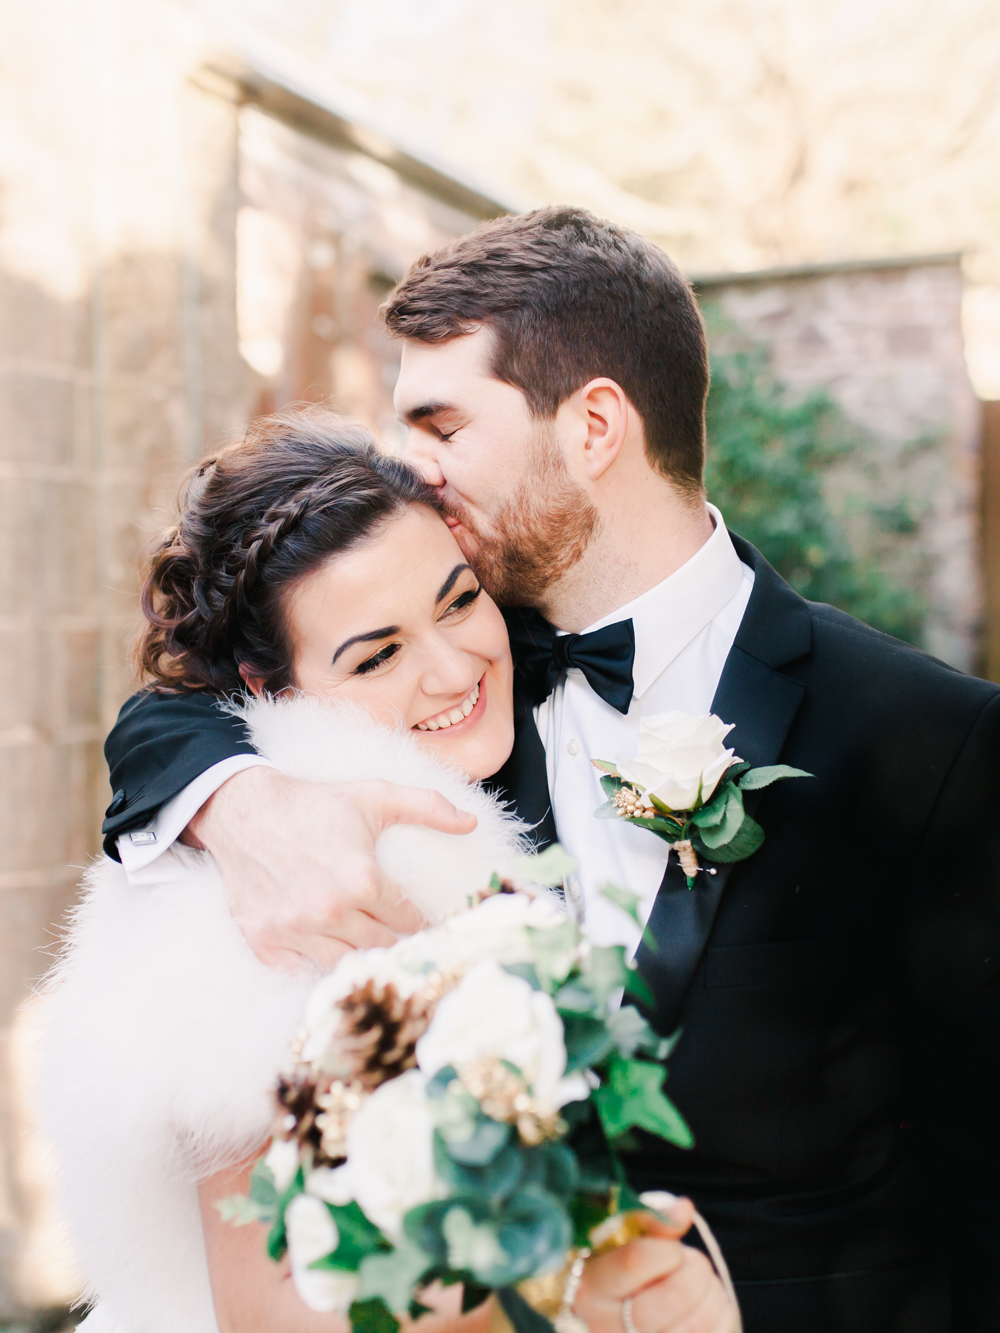 Groom kisses his bride on the forehead after the ceremony at St Audries Park winter wedding